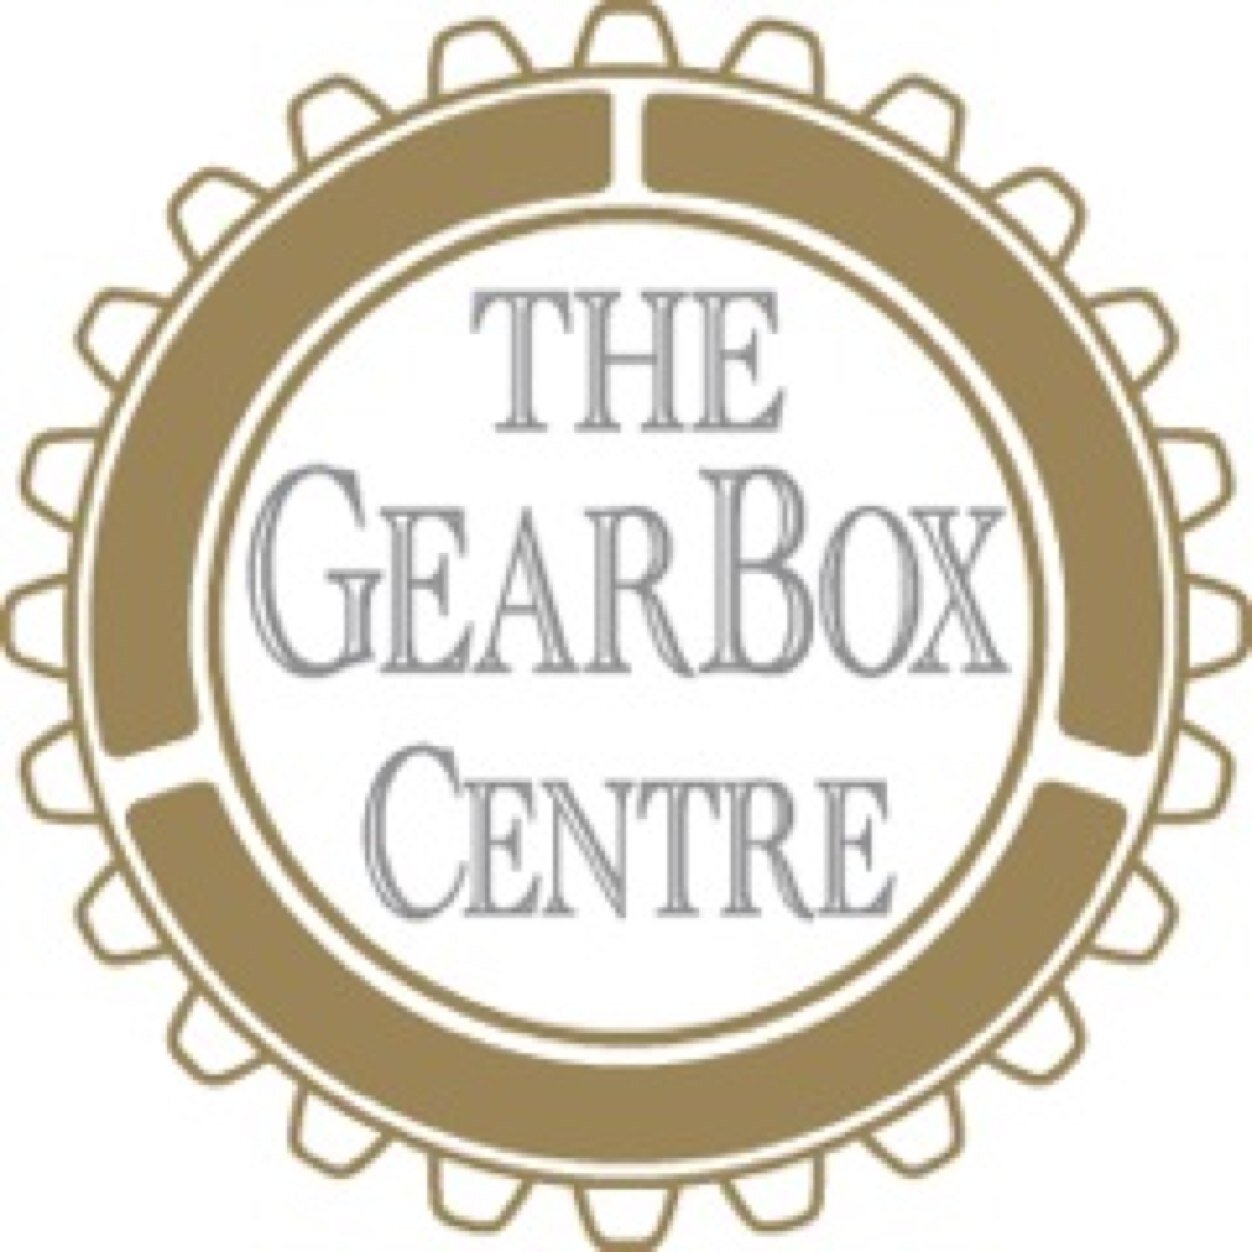 The Gearbox Centre Kent. Contact us for all your gearbox needs. 01795 668080 info@thegearboxcentre.com